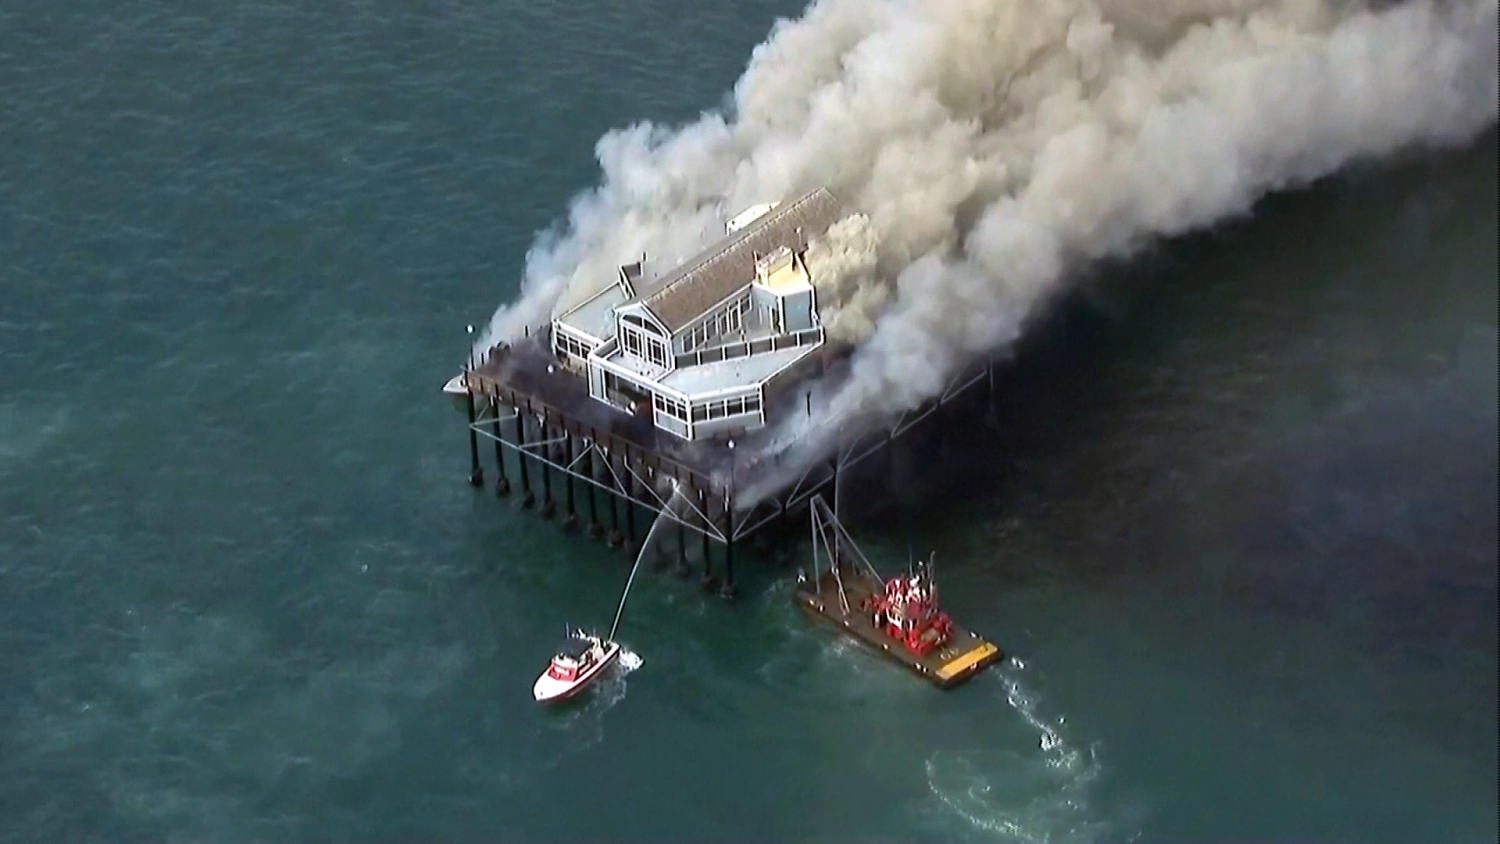 Building at end of Southern California pier catches fire, sending smoke billowing onto beach